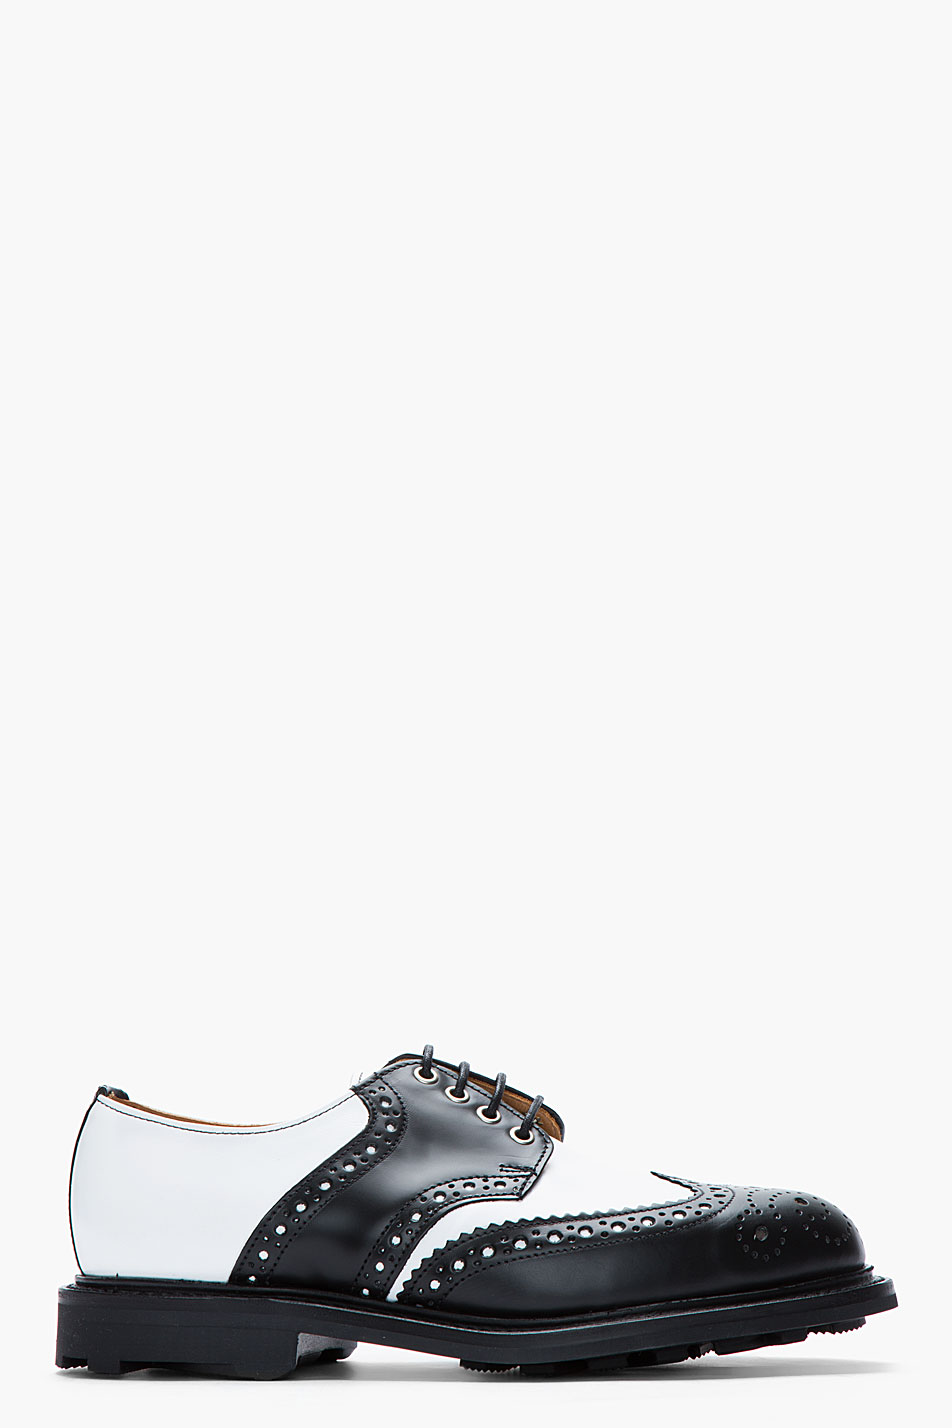 Mark McNairy New Amsterdam Black White Saddle Wingtip Brogues for 